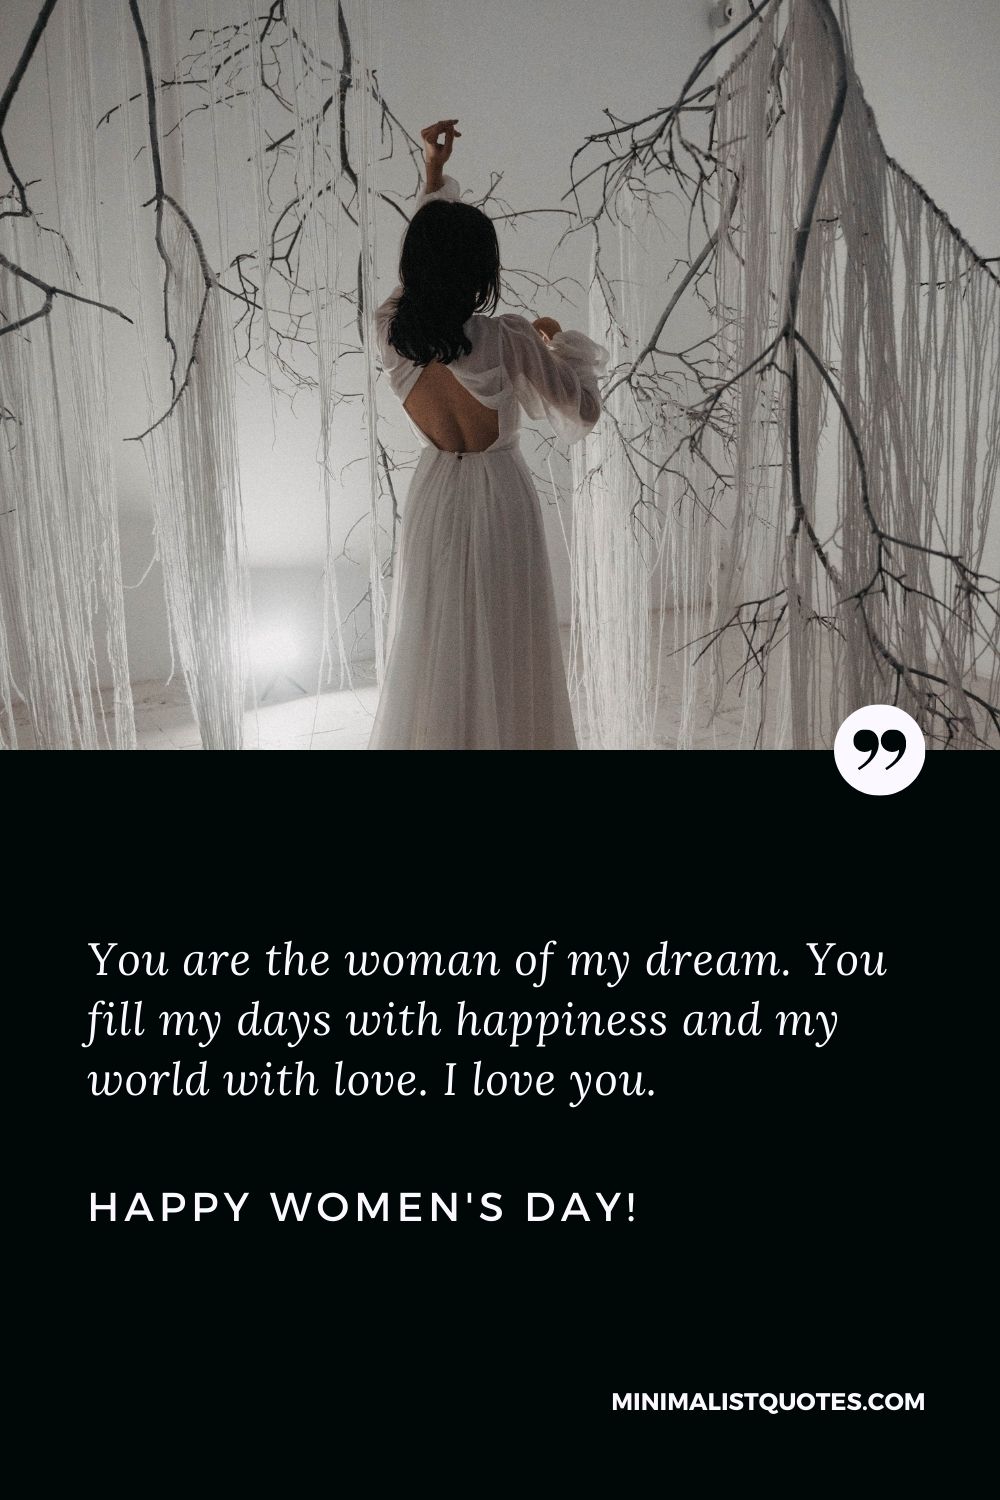 Women's day wishes for girlfriend: You are the woman of my dream. You fill my days with happiness and my world with love. I love you. Happy Womens Day!